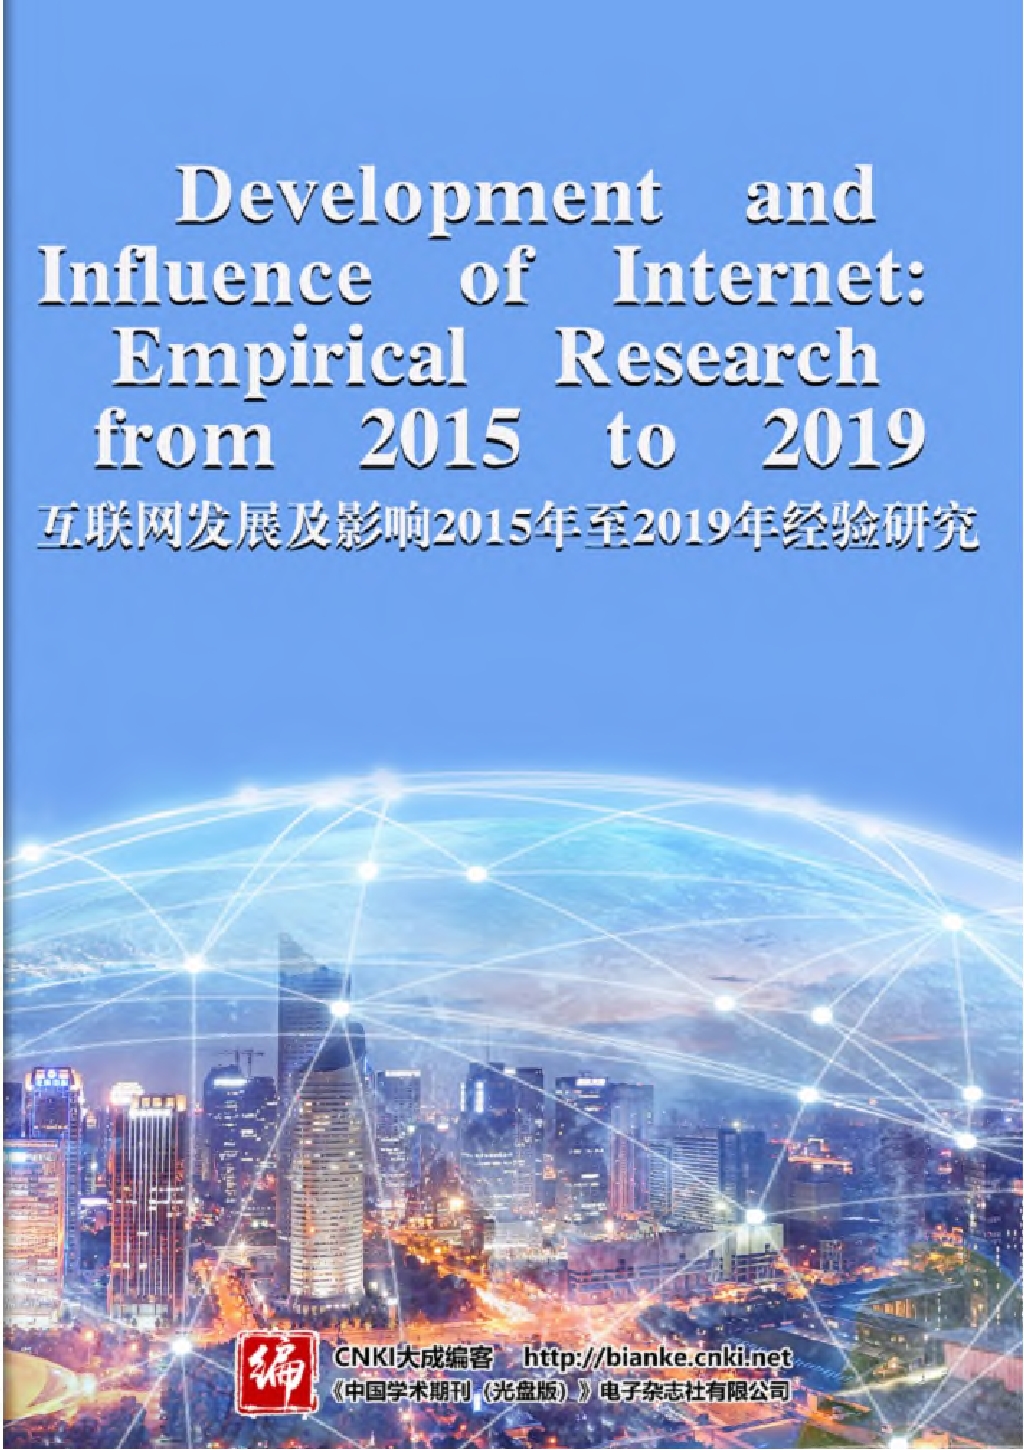 Development and Influence of Internet